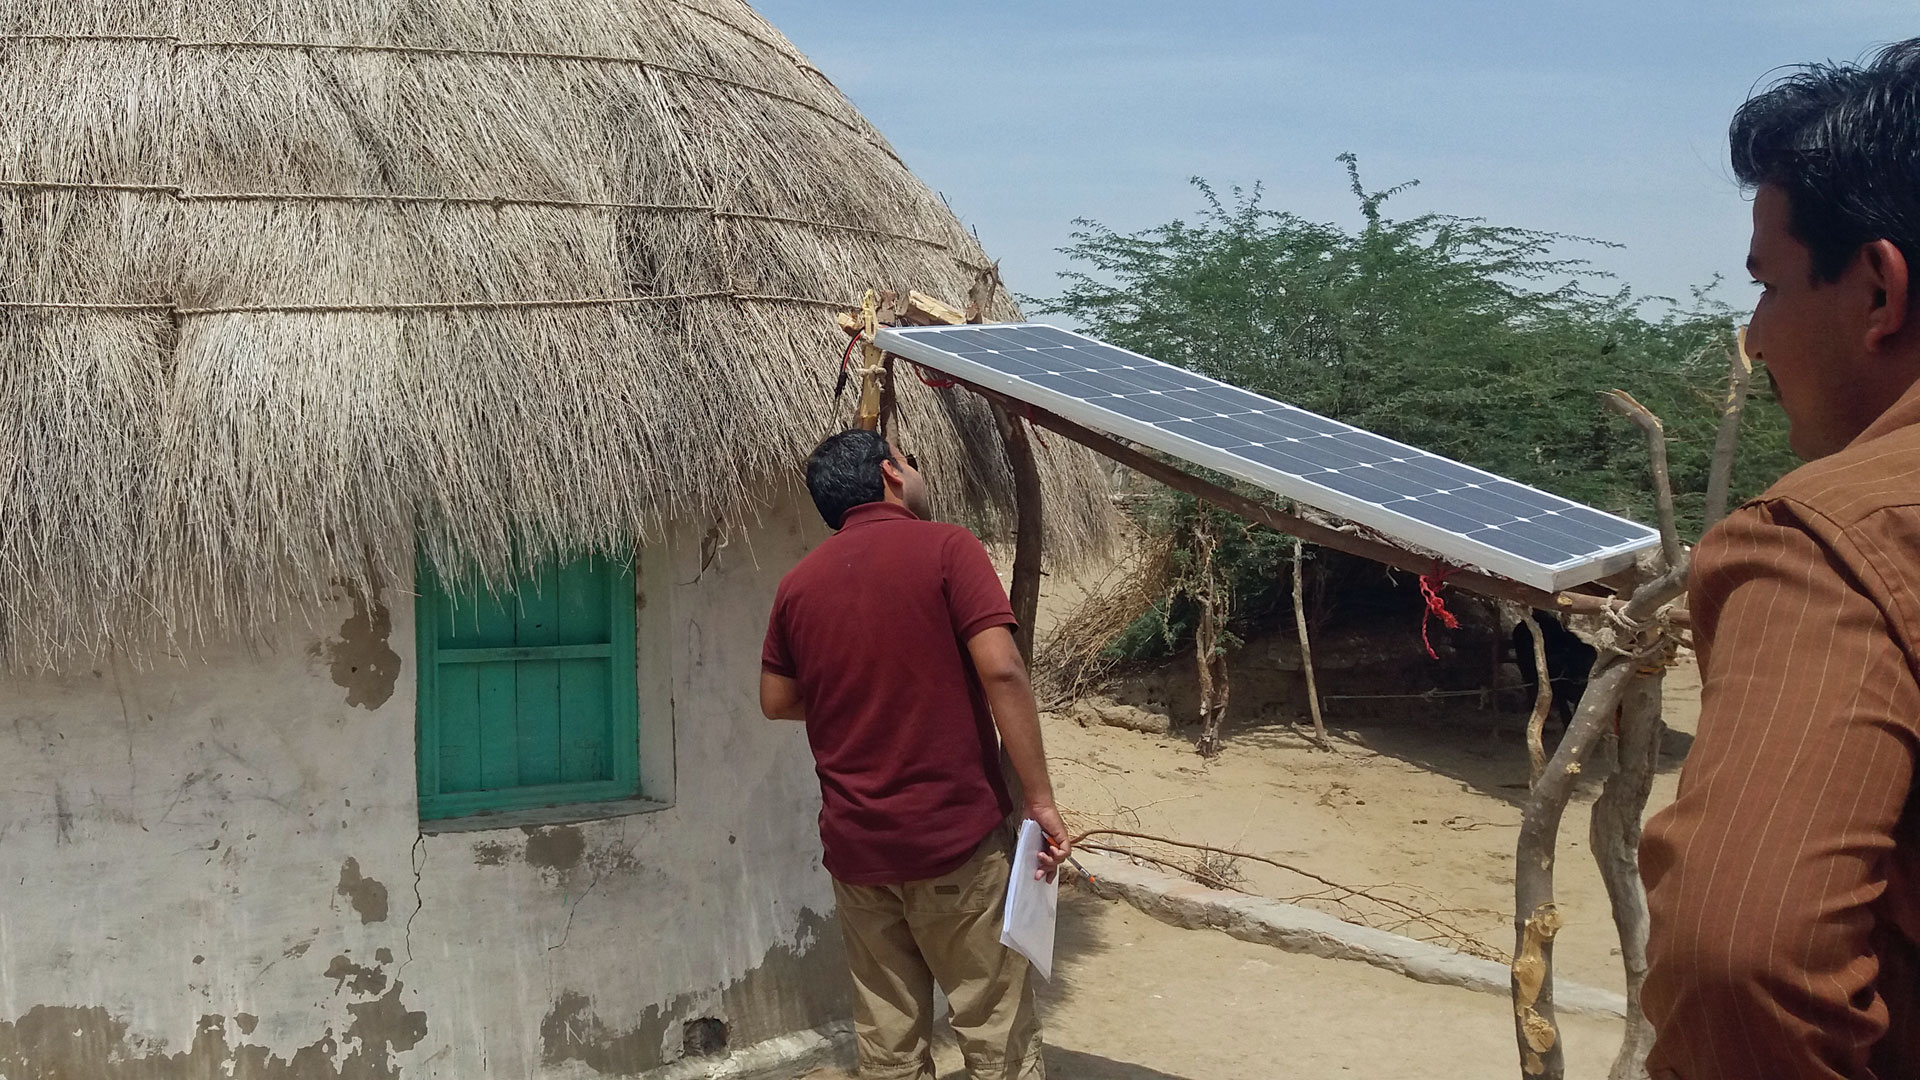 With the support of GIZ, solar systems are installed in Sindh, Pakistan.